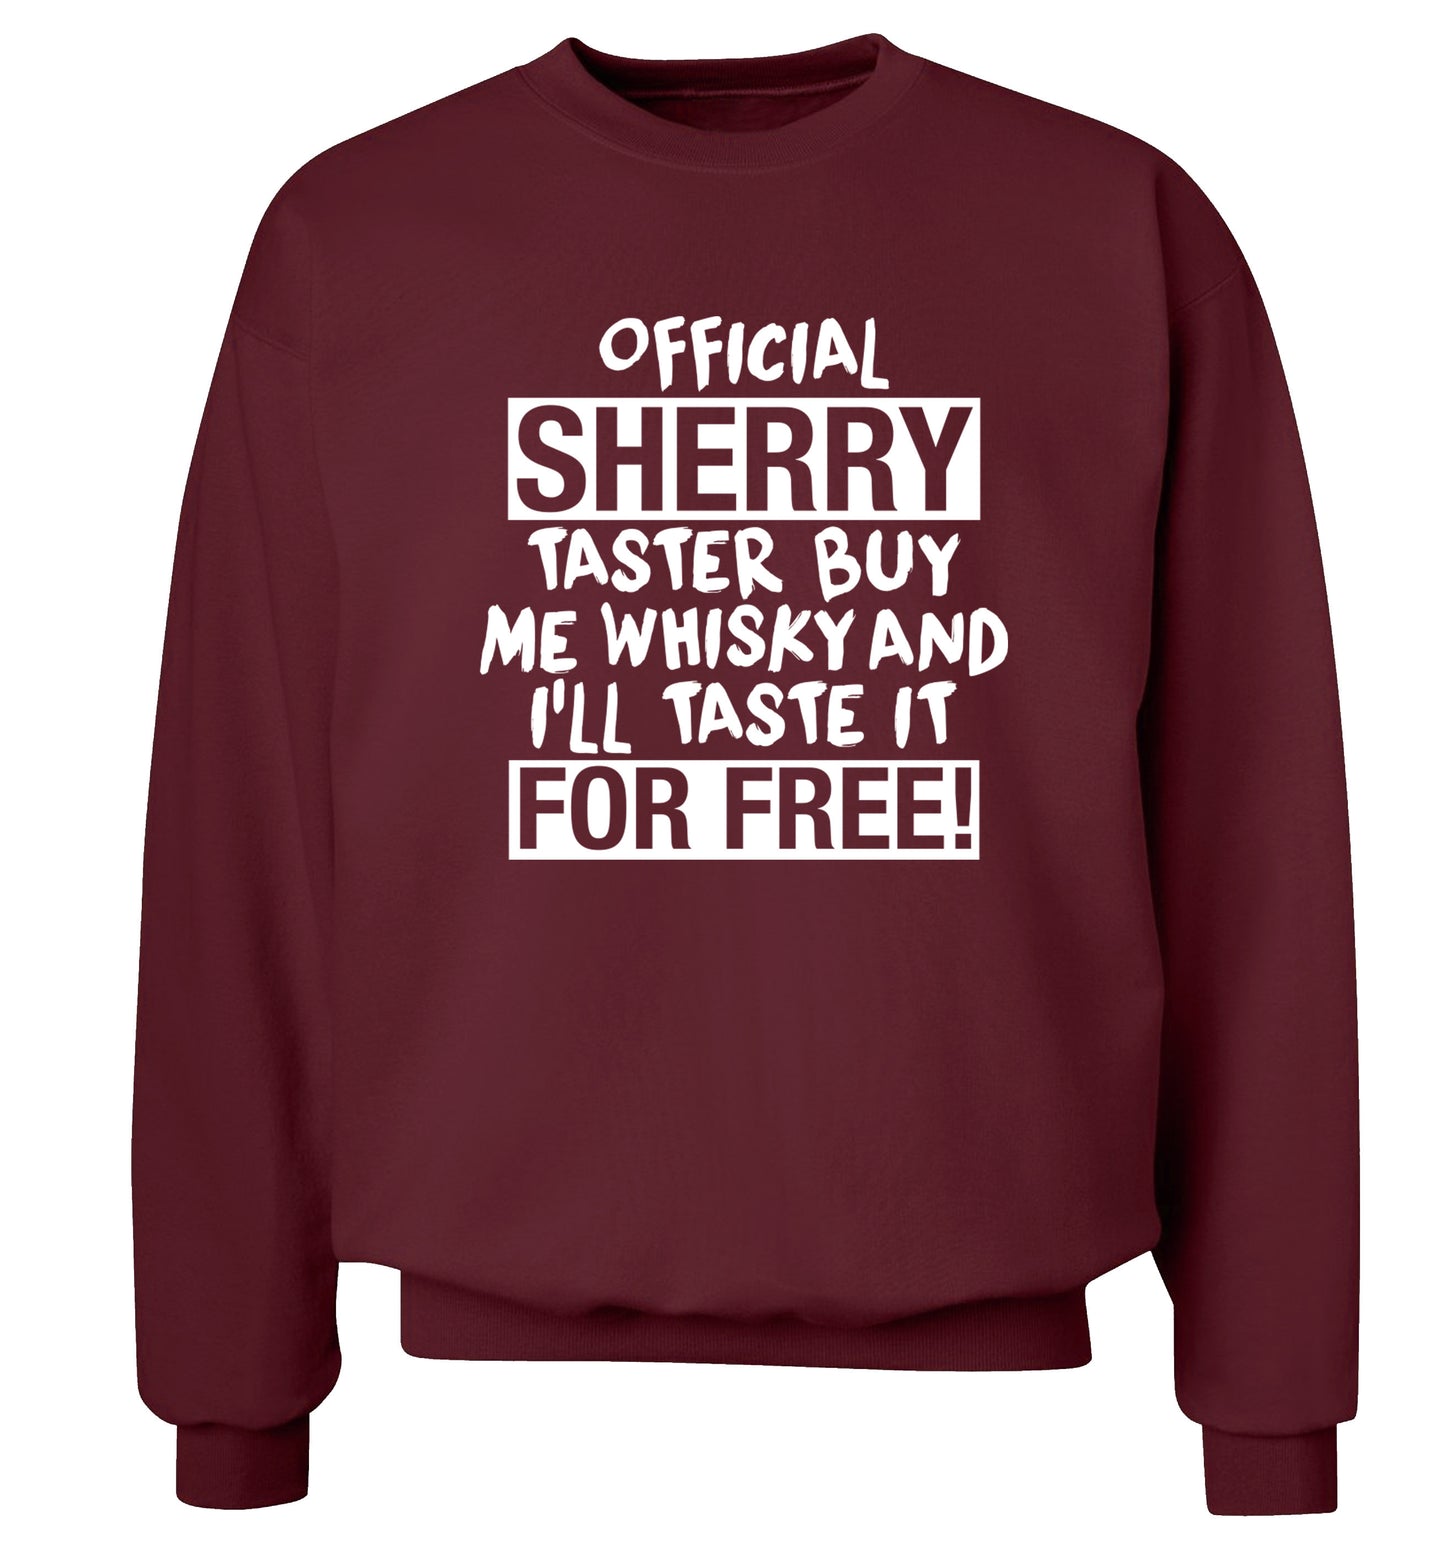 Official sherry taster buy me sherry and I'll taste it for free Adult's unisex maroon Sweater 2XL